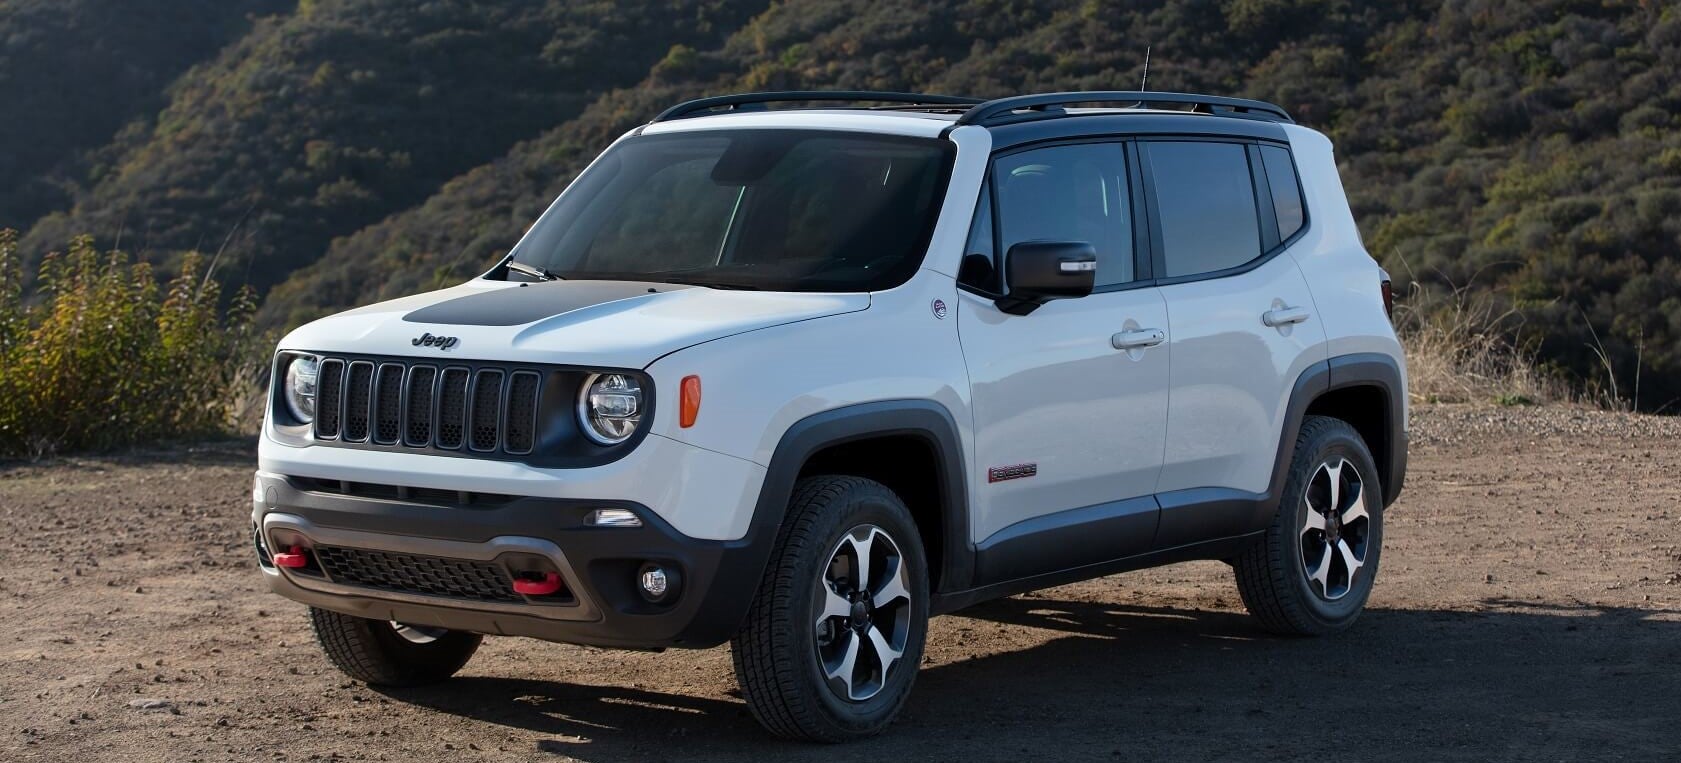 Jeep Renegade For Sale Near Gillette Wy Fremont Cdjr